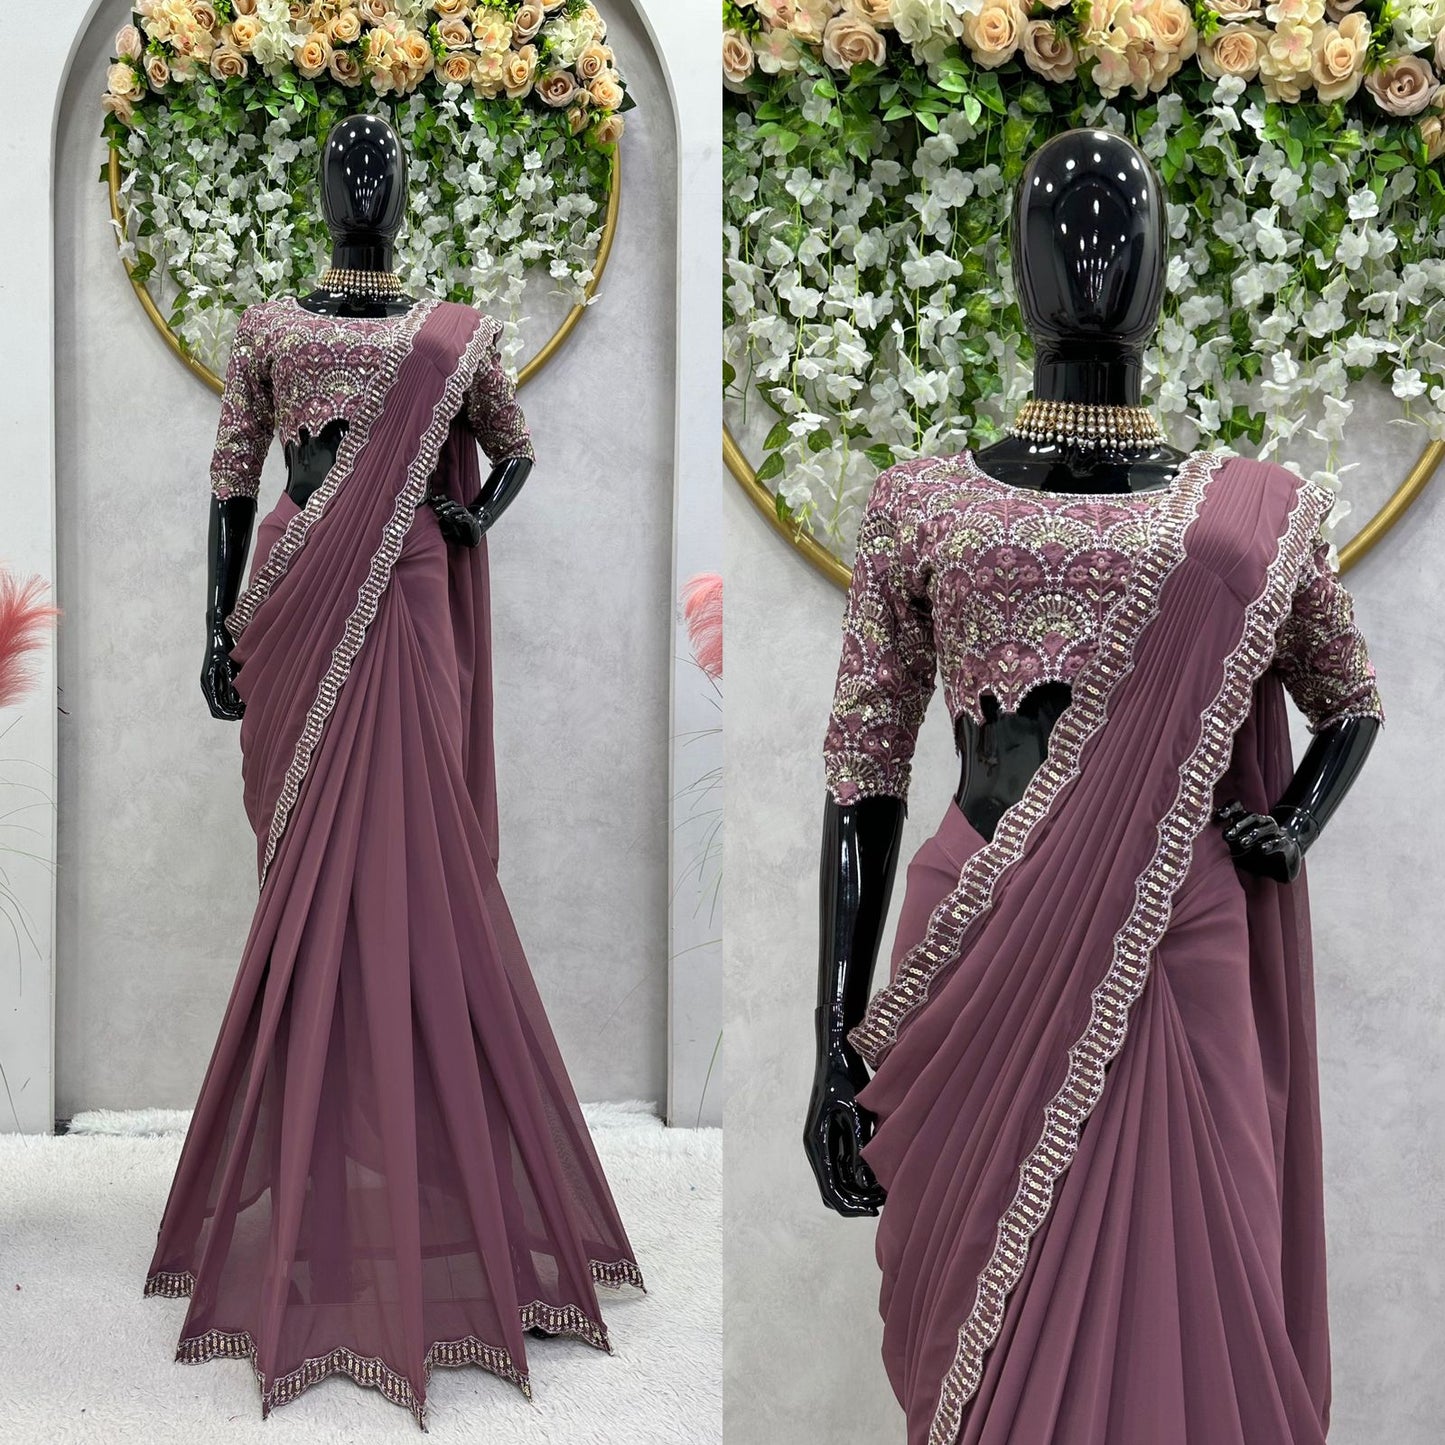 Discover Effortless Elegance with Designer 1M Ready-to-Wear Saree | Buy Now